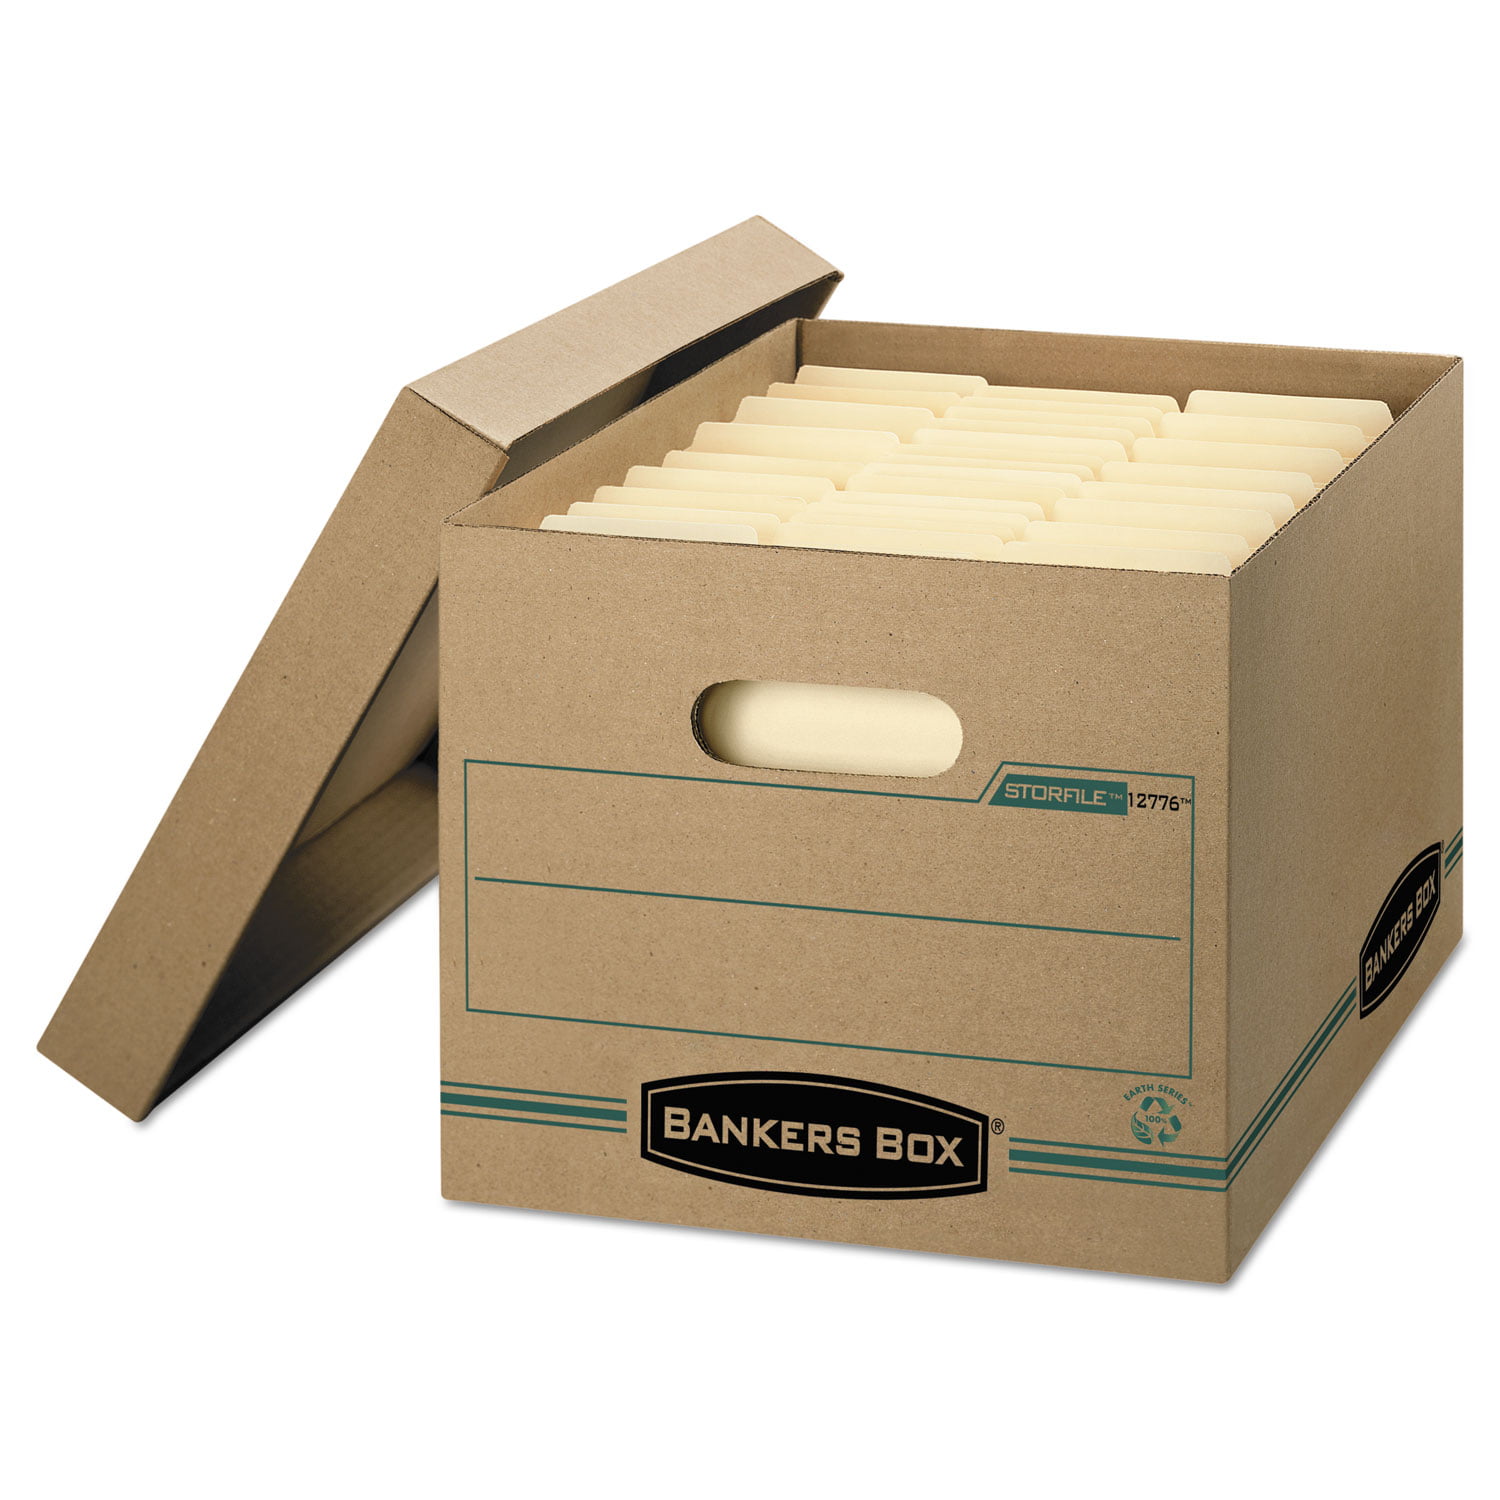 Bankers Box Multi-Use Quality General Storage Archive Boxes With Lid Pack Of 10 